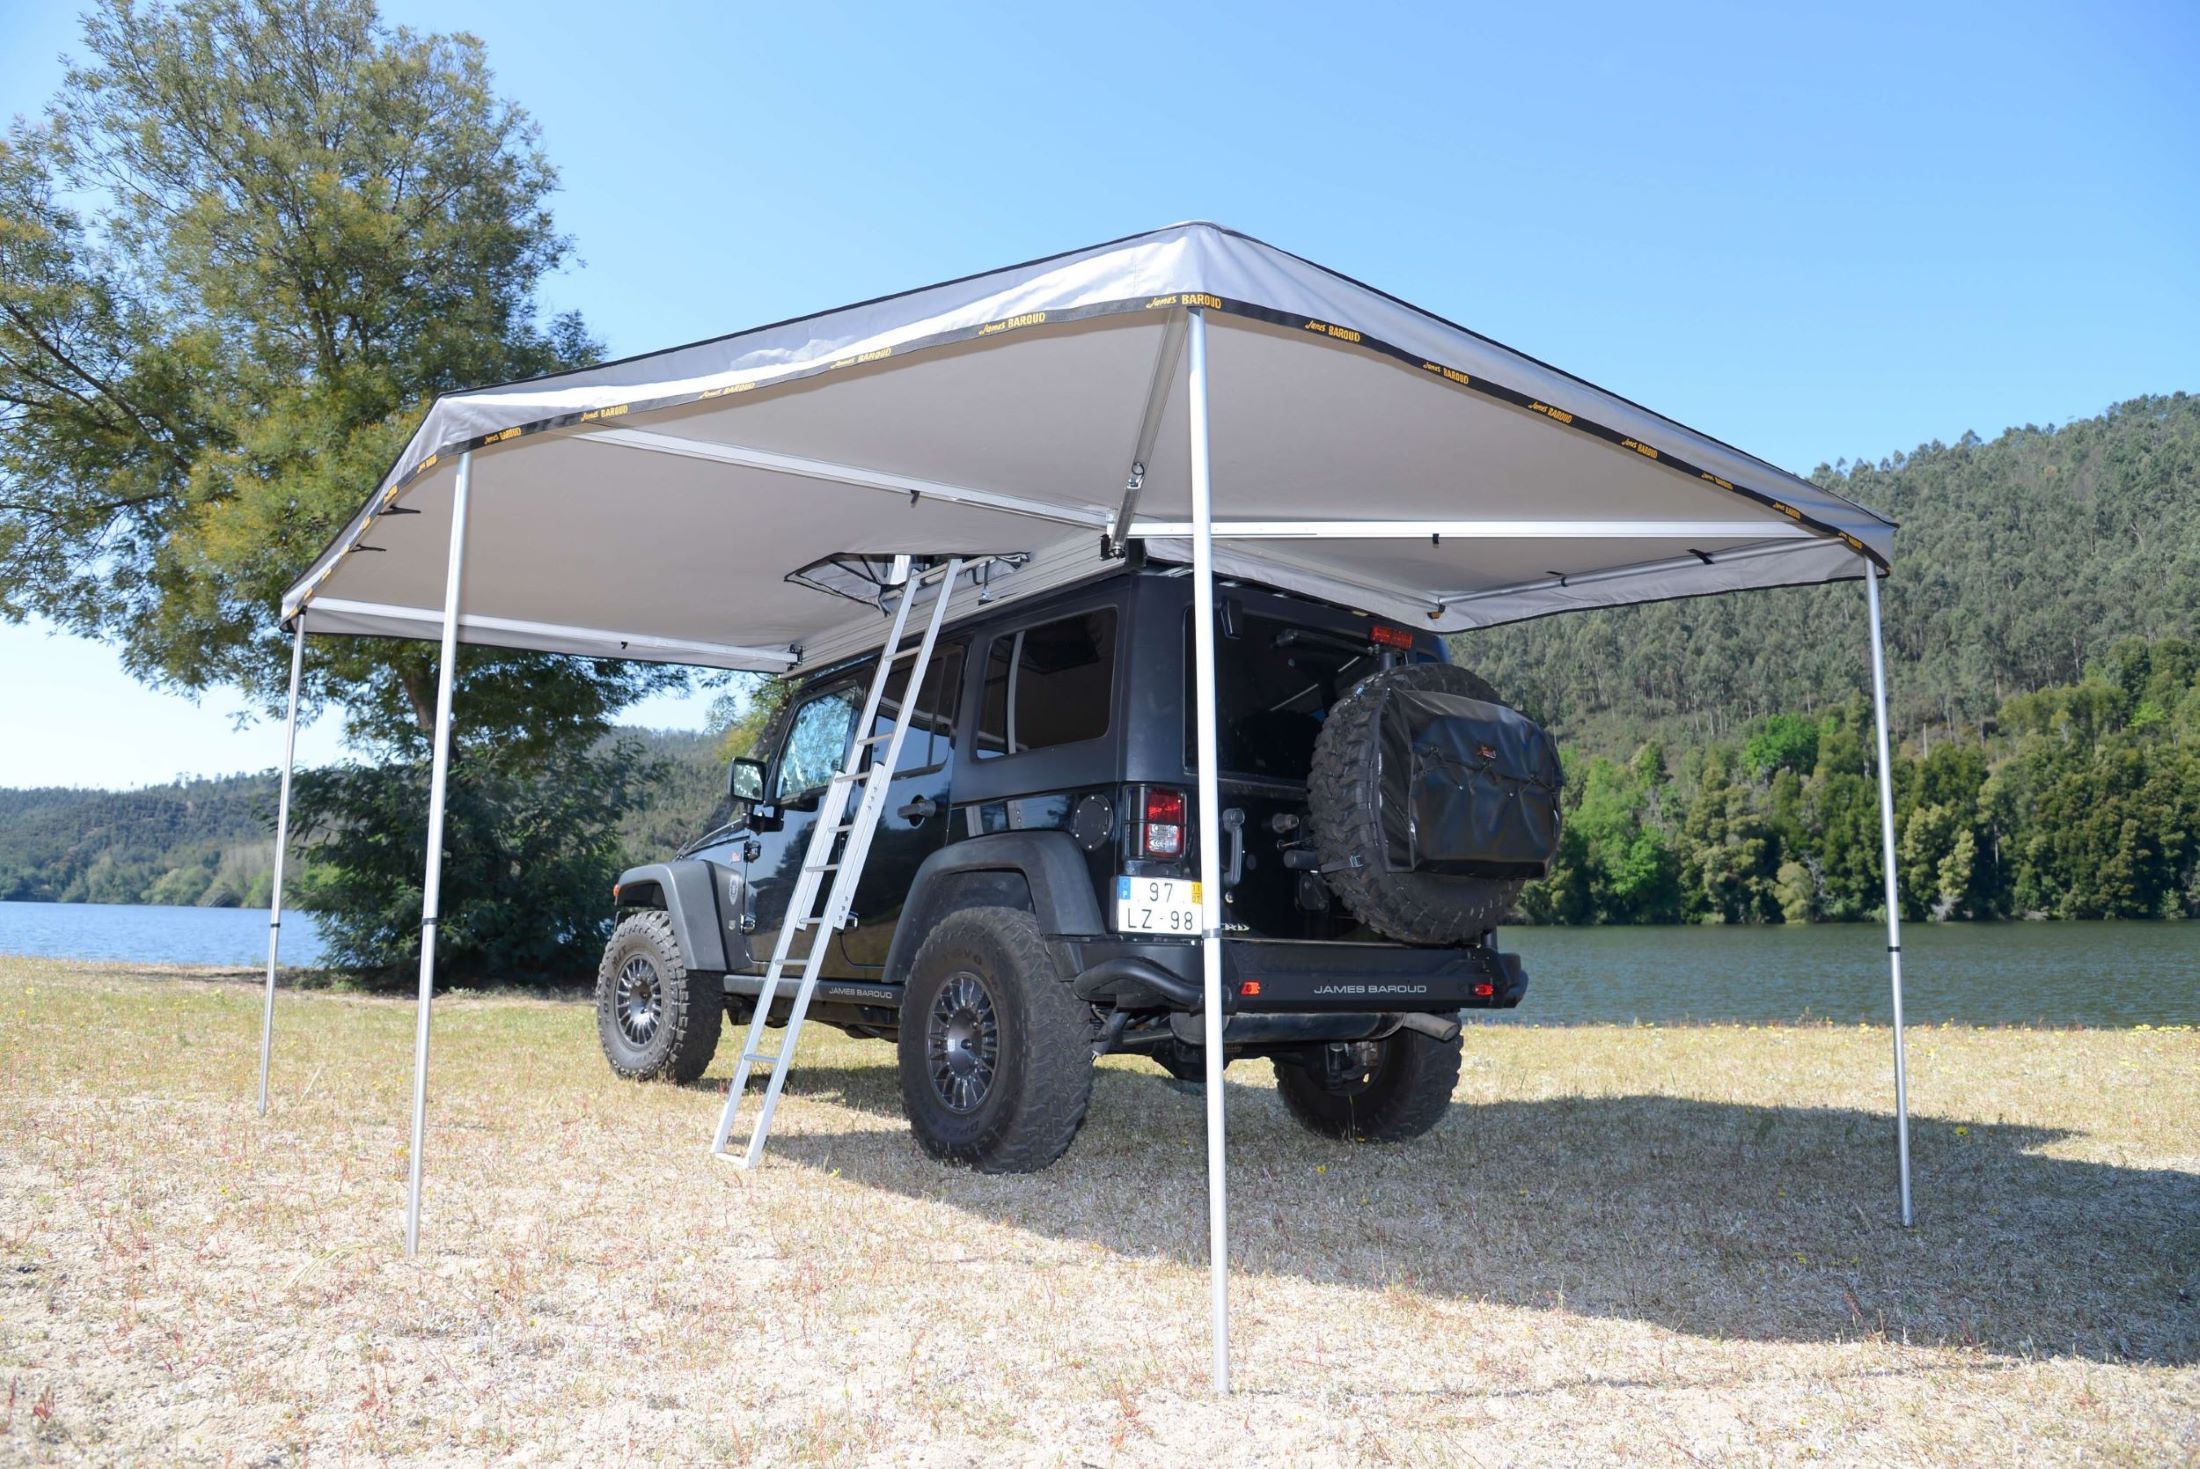 Awnings that offer convenience, quality and comfort